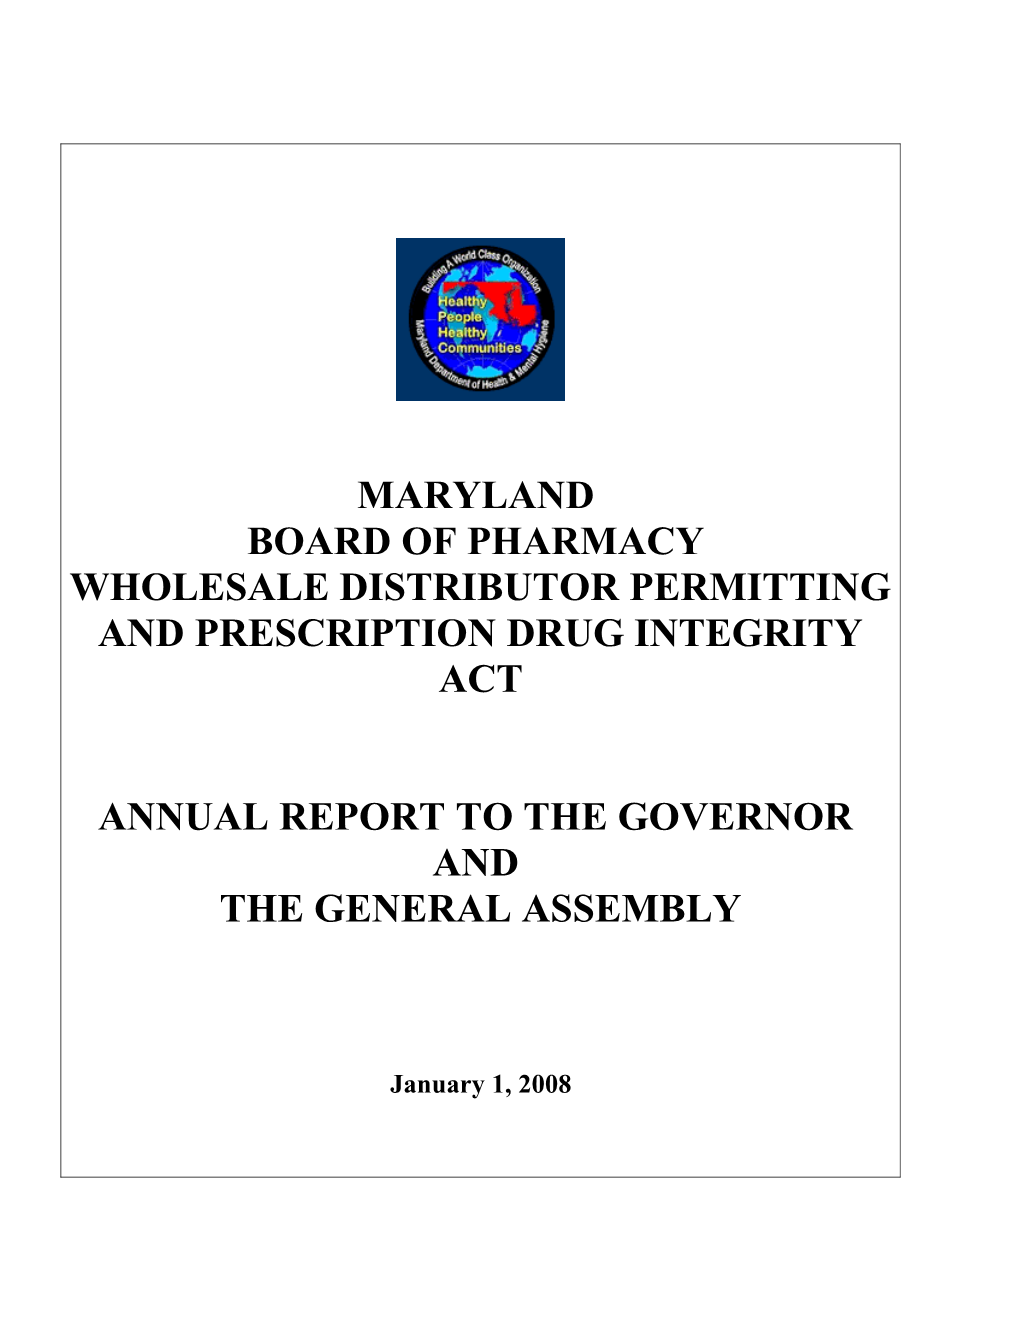 Wholesale Distributor Permitting and Prescription Drug Integrity Act s1